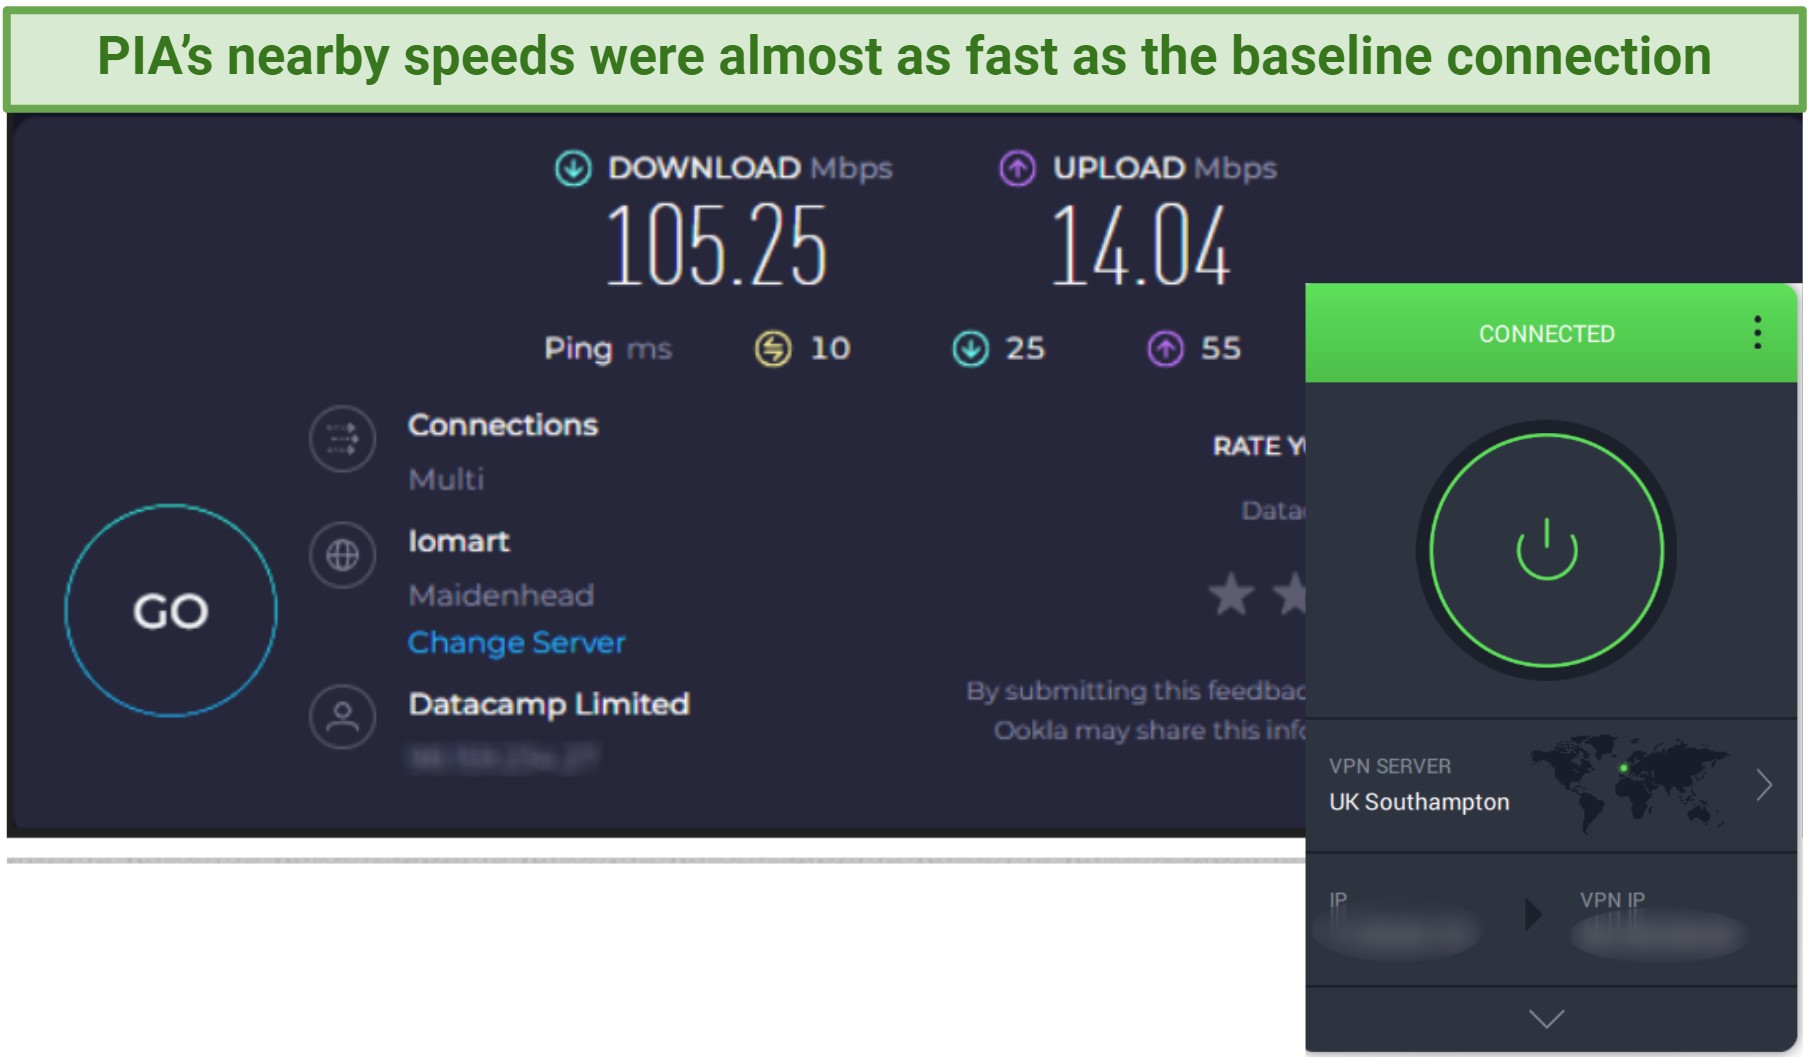 Screenshot showing PIA's download and upload speeds